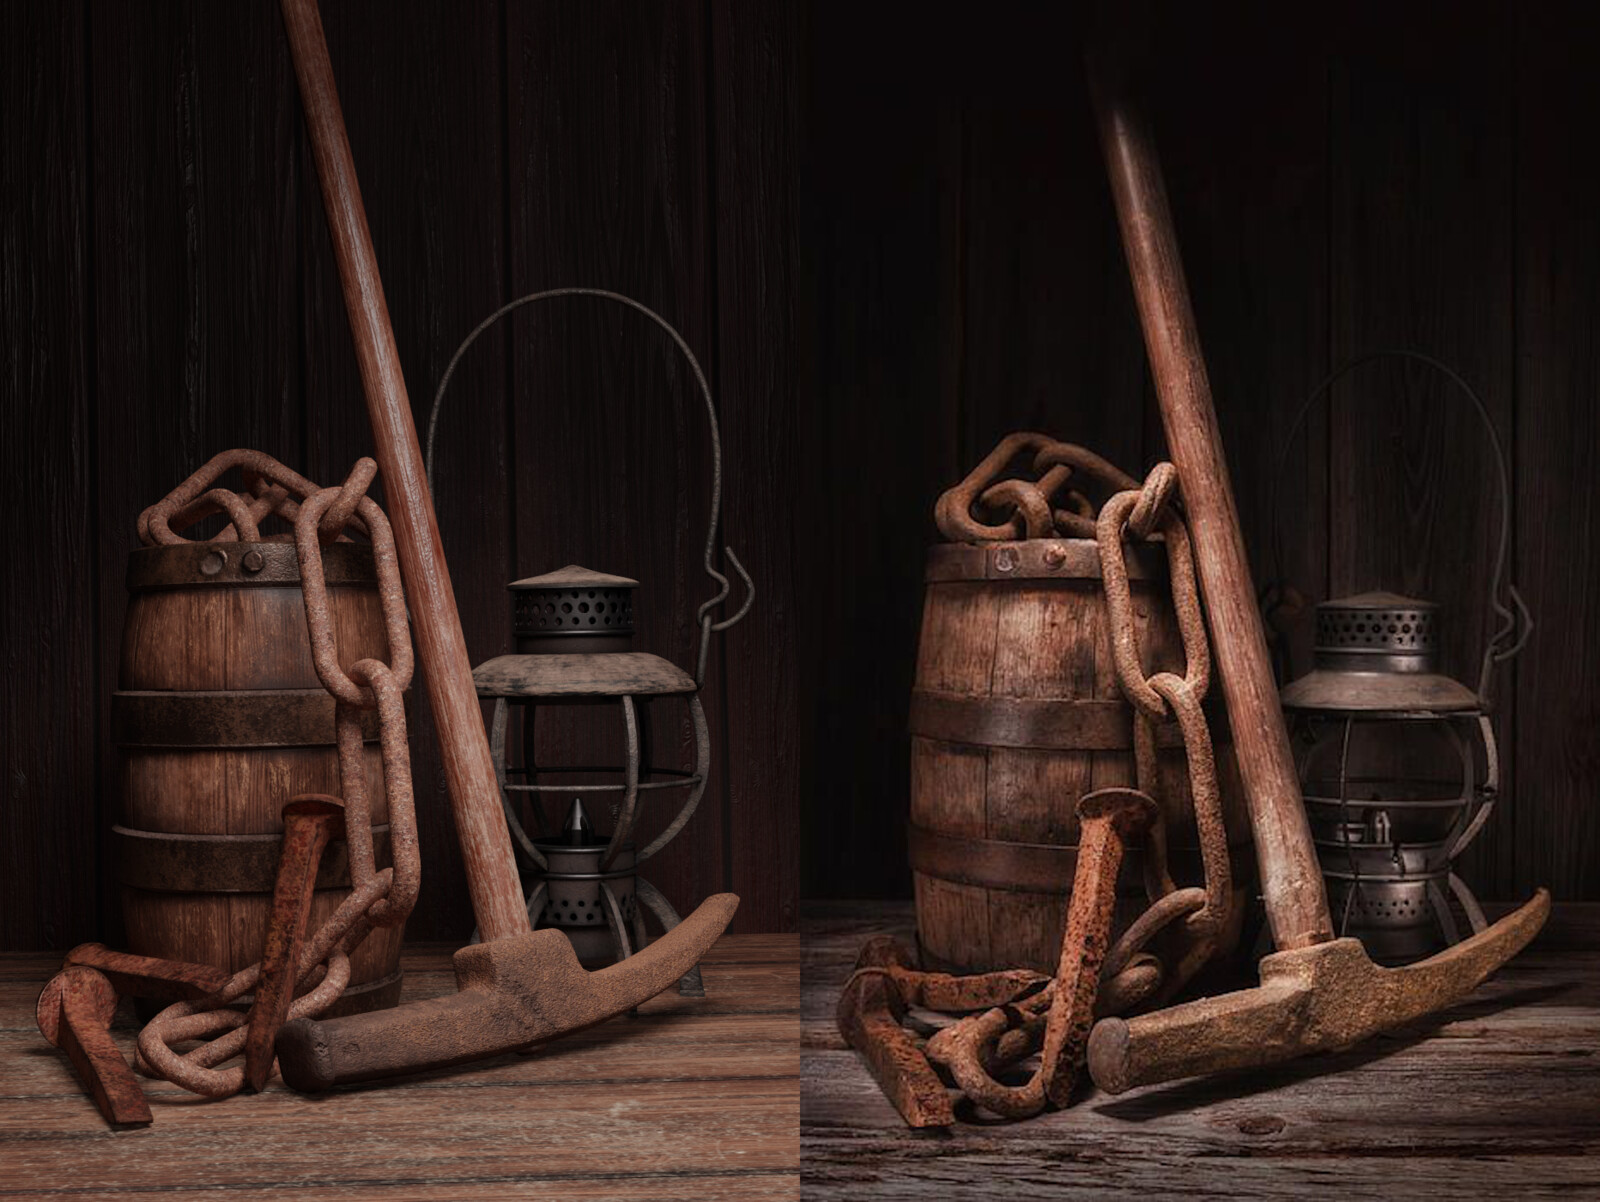 Render (left) and original photo (right)